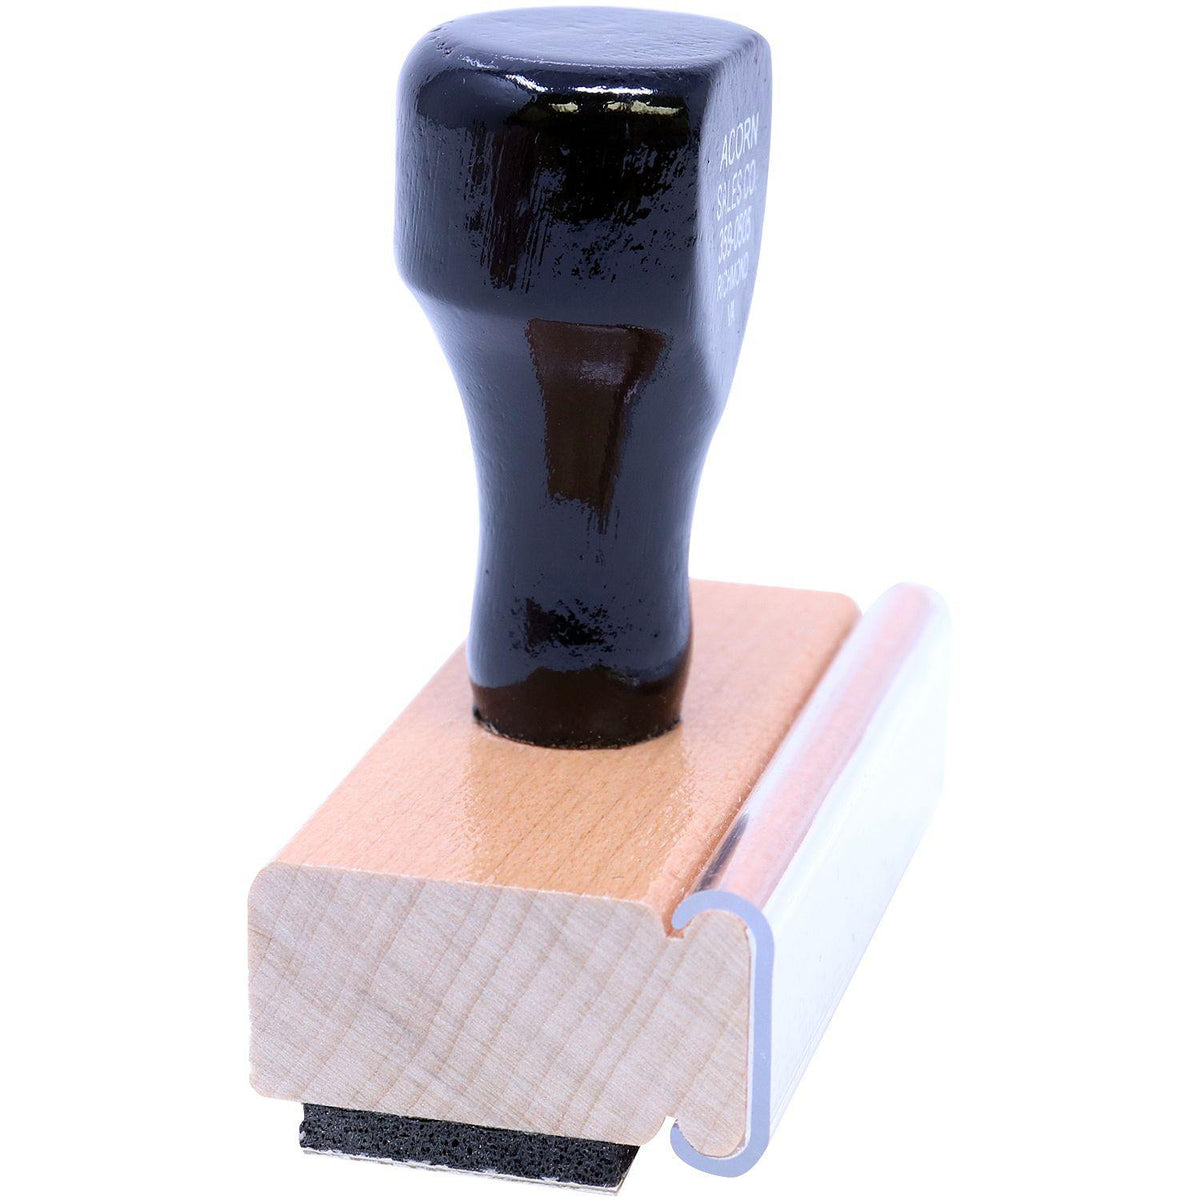 Side View of Blue Ribbon Rubber Stamp at an Angle